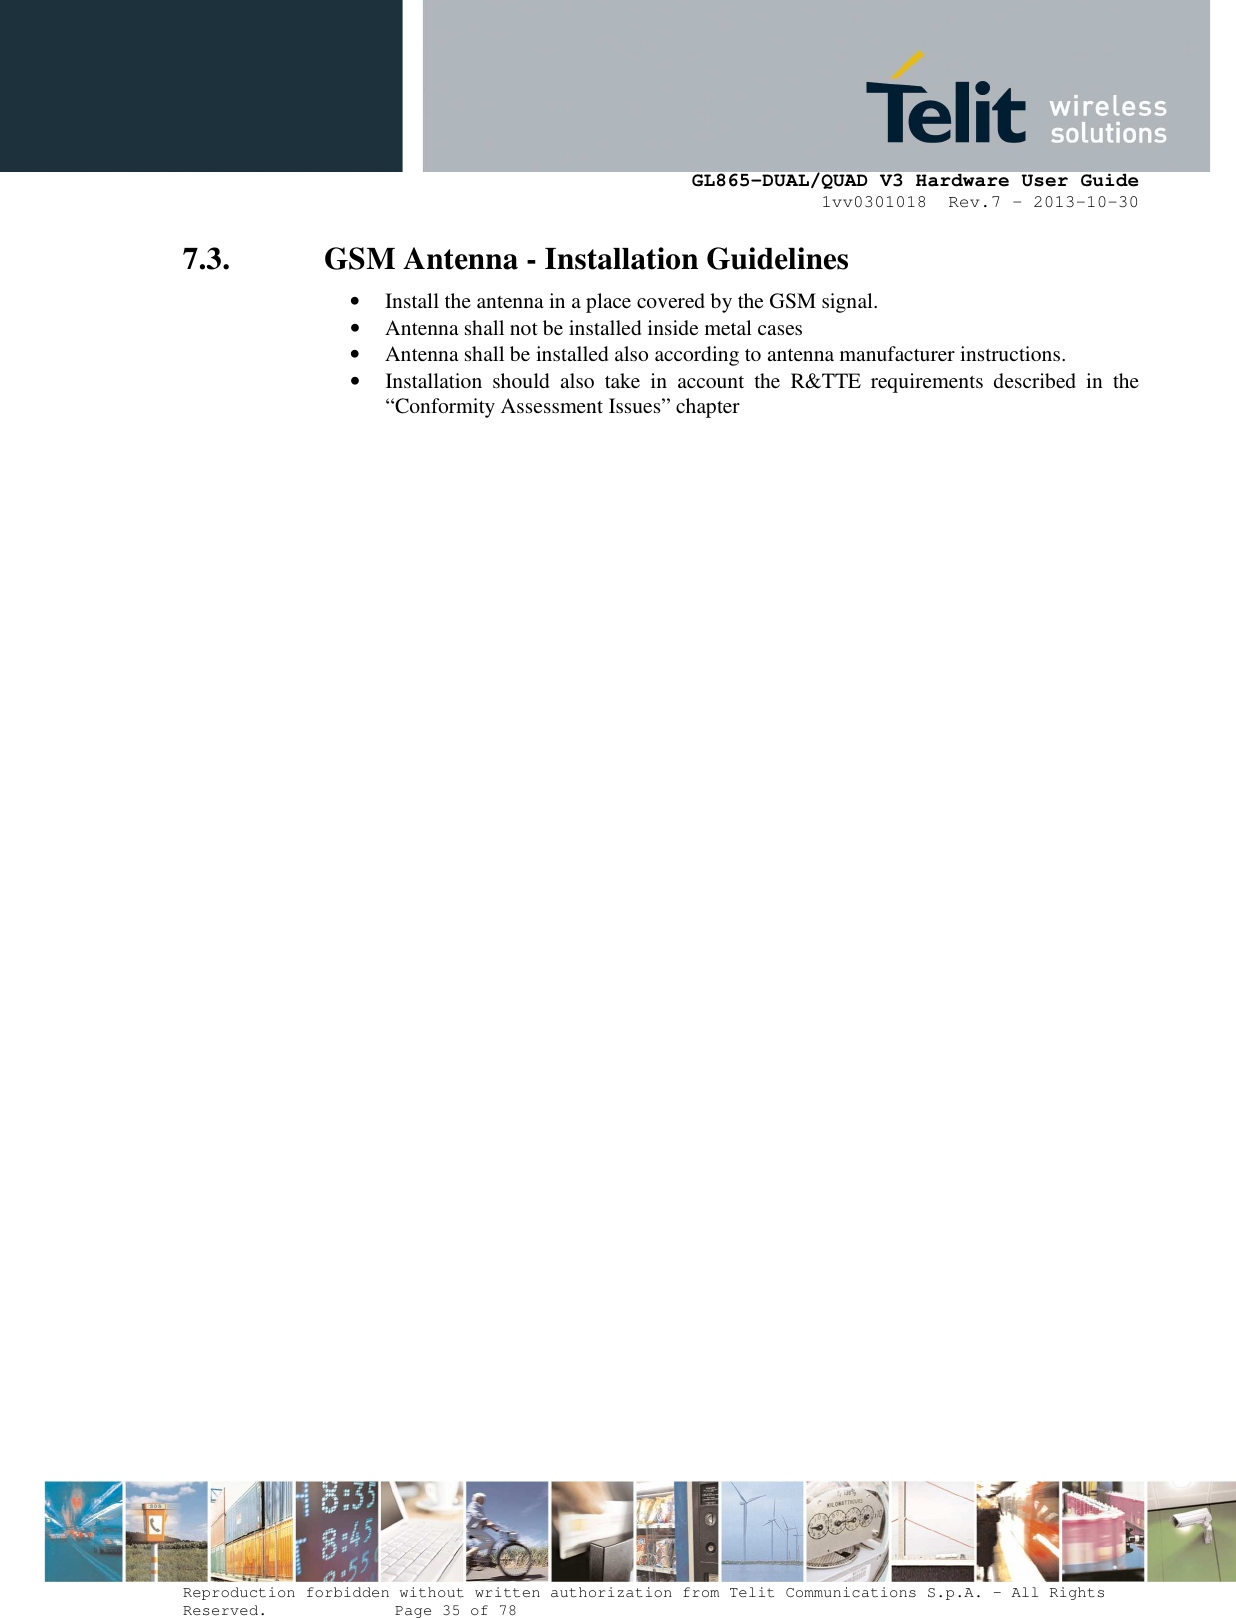      GL865-DUAL/QUAD V3 Hardware User Guide 1vv0301018  Rev.7 – 2013-10-30  Reproduction forbidden without written authorization from Telit Communications S.p.A. - All Rights Reserved.    Page 35 of 78 Mod. 0805 2011-07 Rev.2 7.3. GSM Antenna - Installation Guidelines • Install the antenna in a place covered by the GSM signal. • Antenna shall not be installed inside metal cases  • Antenna shall be installed also according to antenna manufacturer instructions. • Installation  should  also  take  in  account  the  R&amp;TTE  requirements  described  in  the “Conformity Assessment Issues” chapter    